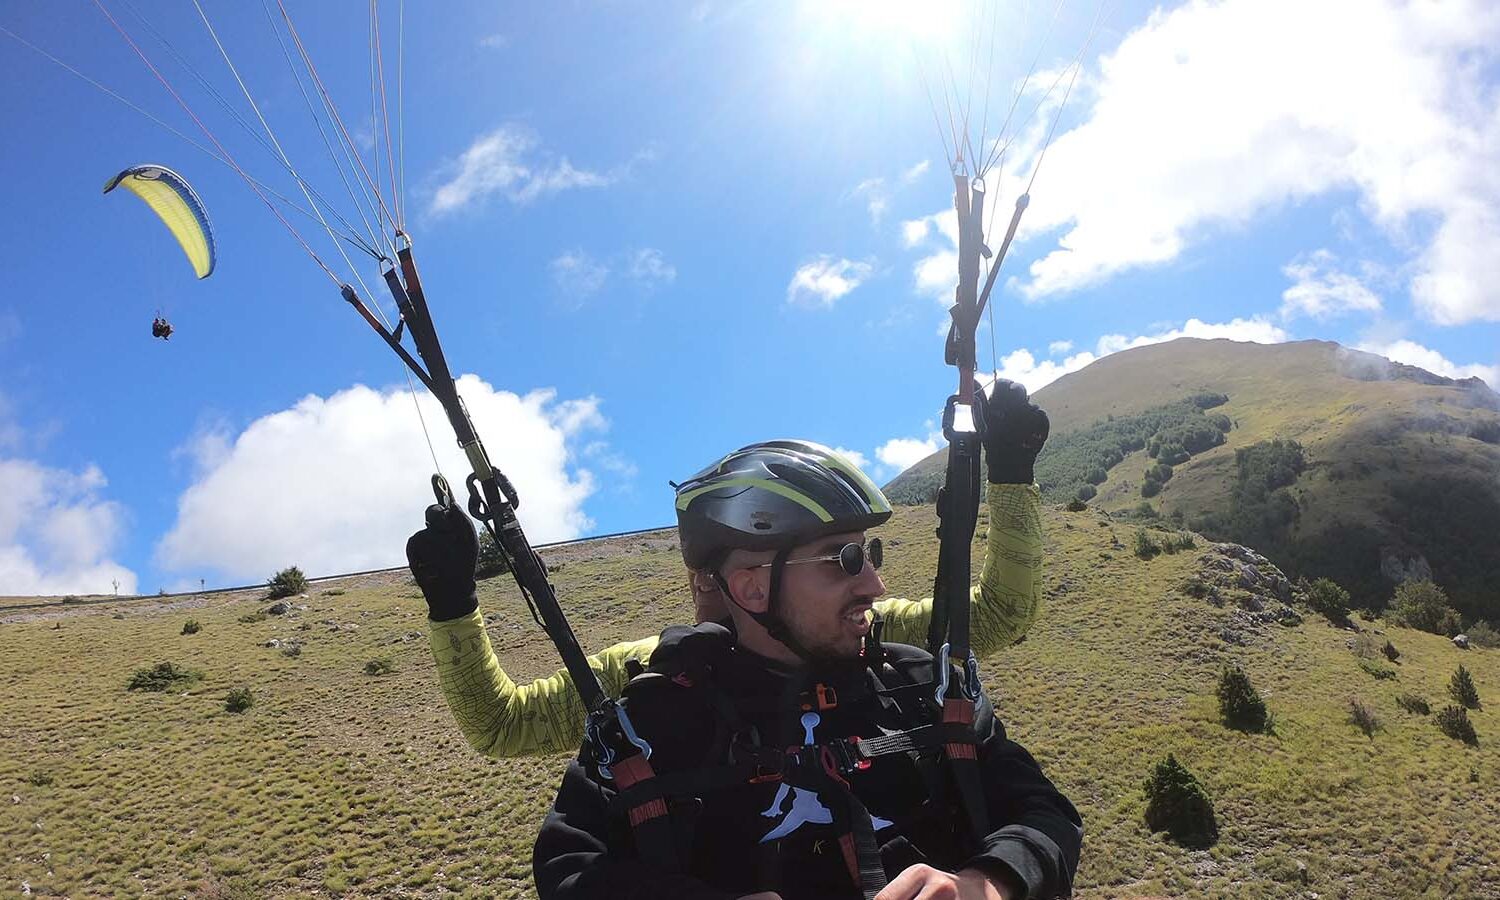 Paragliding Take-off at Galicica National Park Ohrid